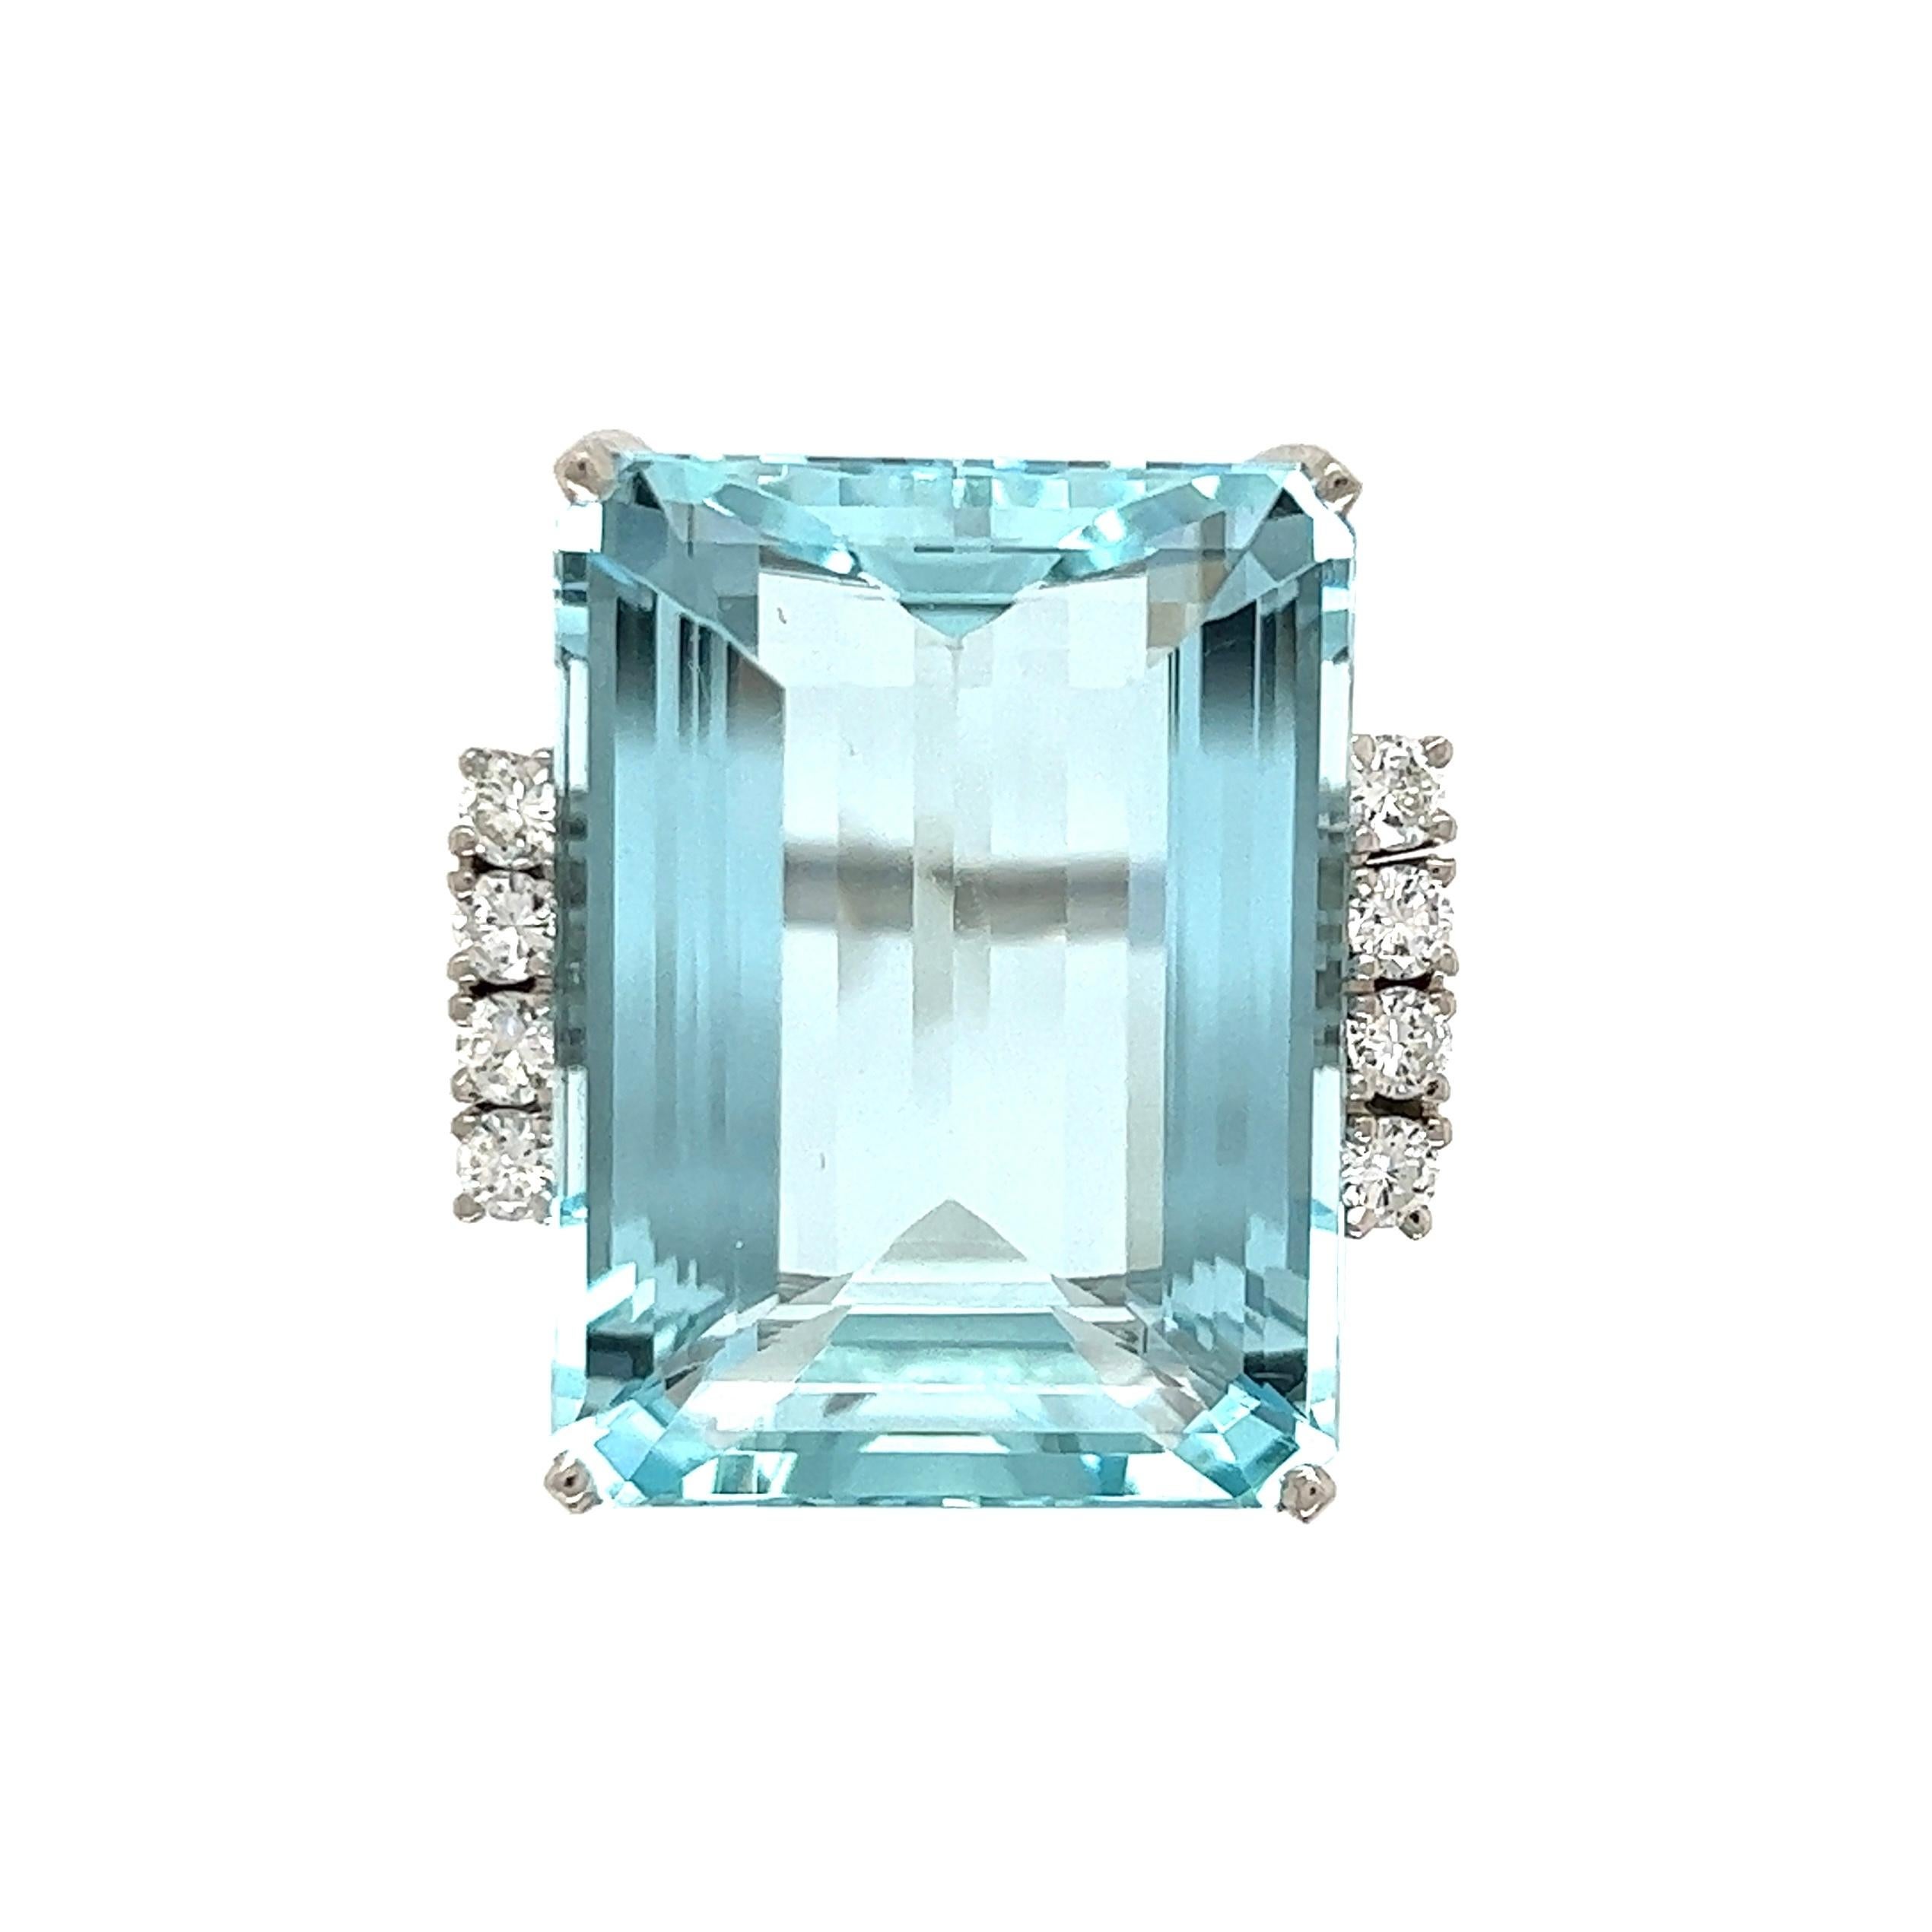 Simply Beautiful! Aquamarine and Diamond Platinum Retro Ring. Center securely set with an Aquamarine weighing 37.50 Carat. Both sides of ring Hand set with Diamonds, approx. 0.35tcw. Hand crafted Platinum mounting. Dimensions: 1.14” l x 0.85” w x